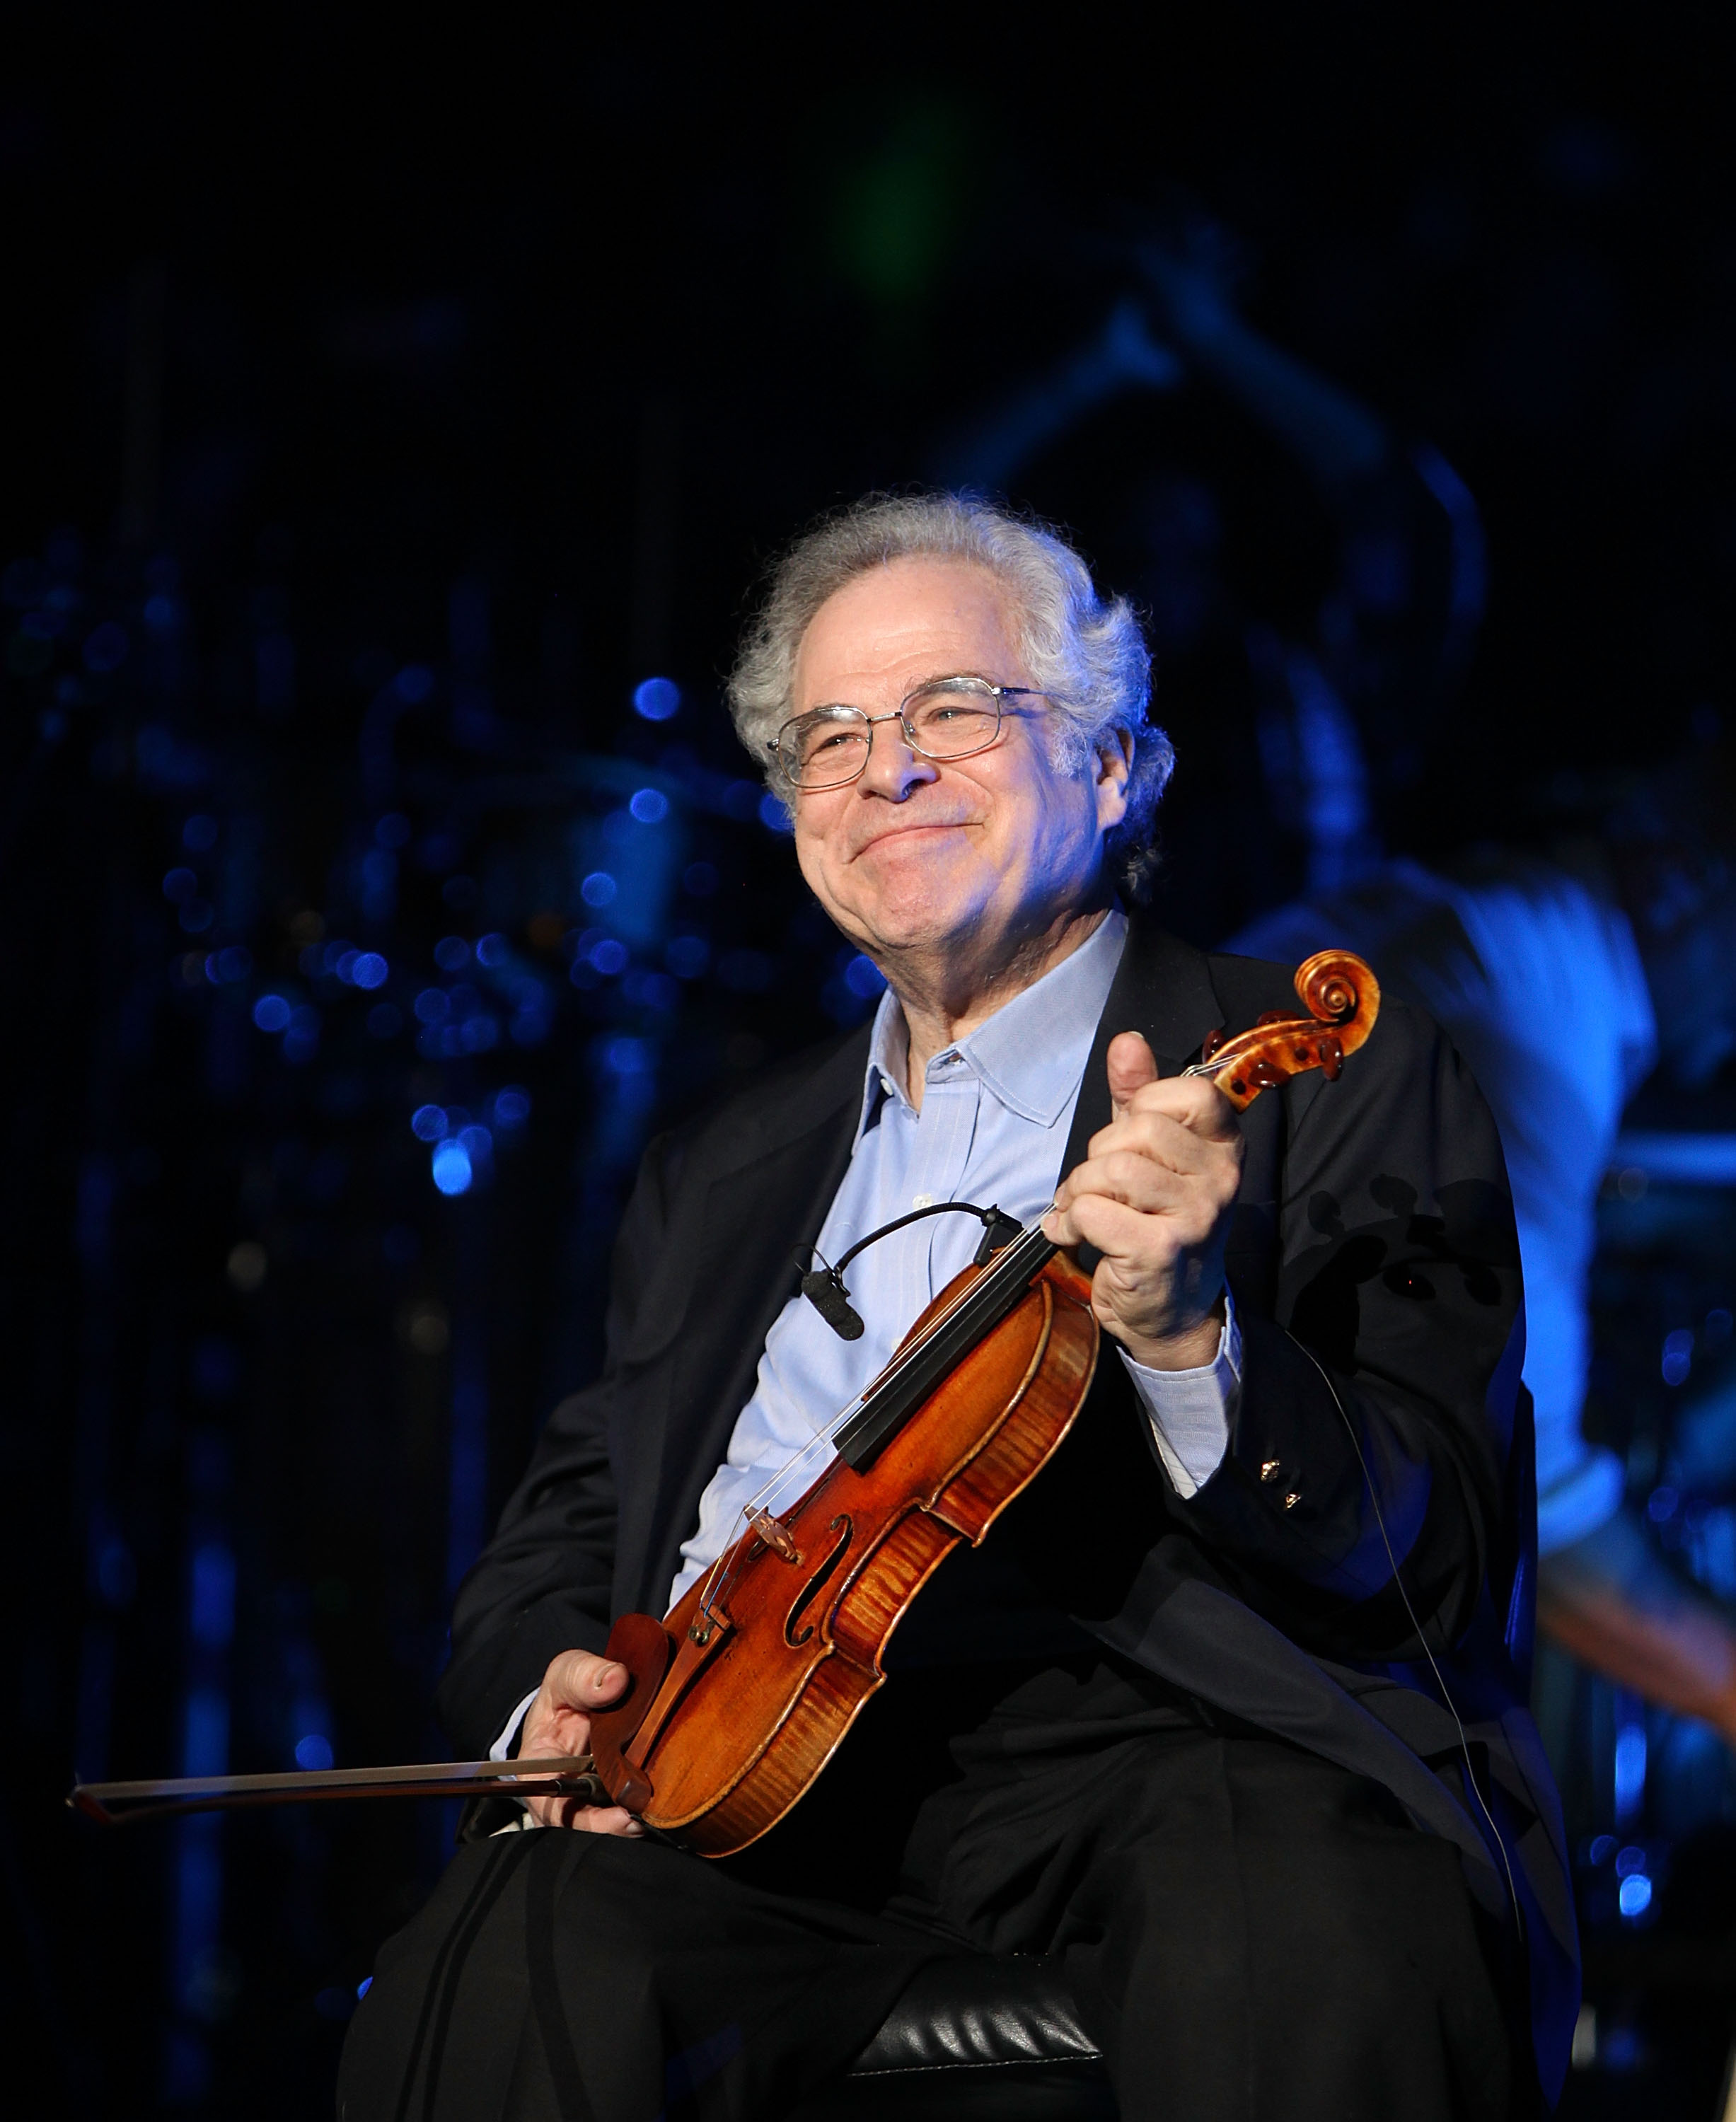 Violinist virtuoso Itzhak Perlman performs at  Billy Joel's sold out concert at Madison Square Garden on March 9, 2015 in New York City. (Myrna Suarez/Getty Images)